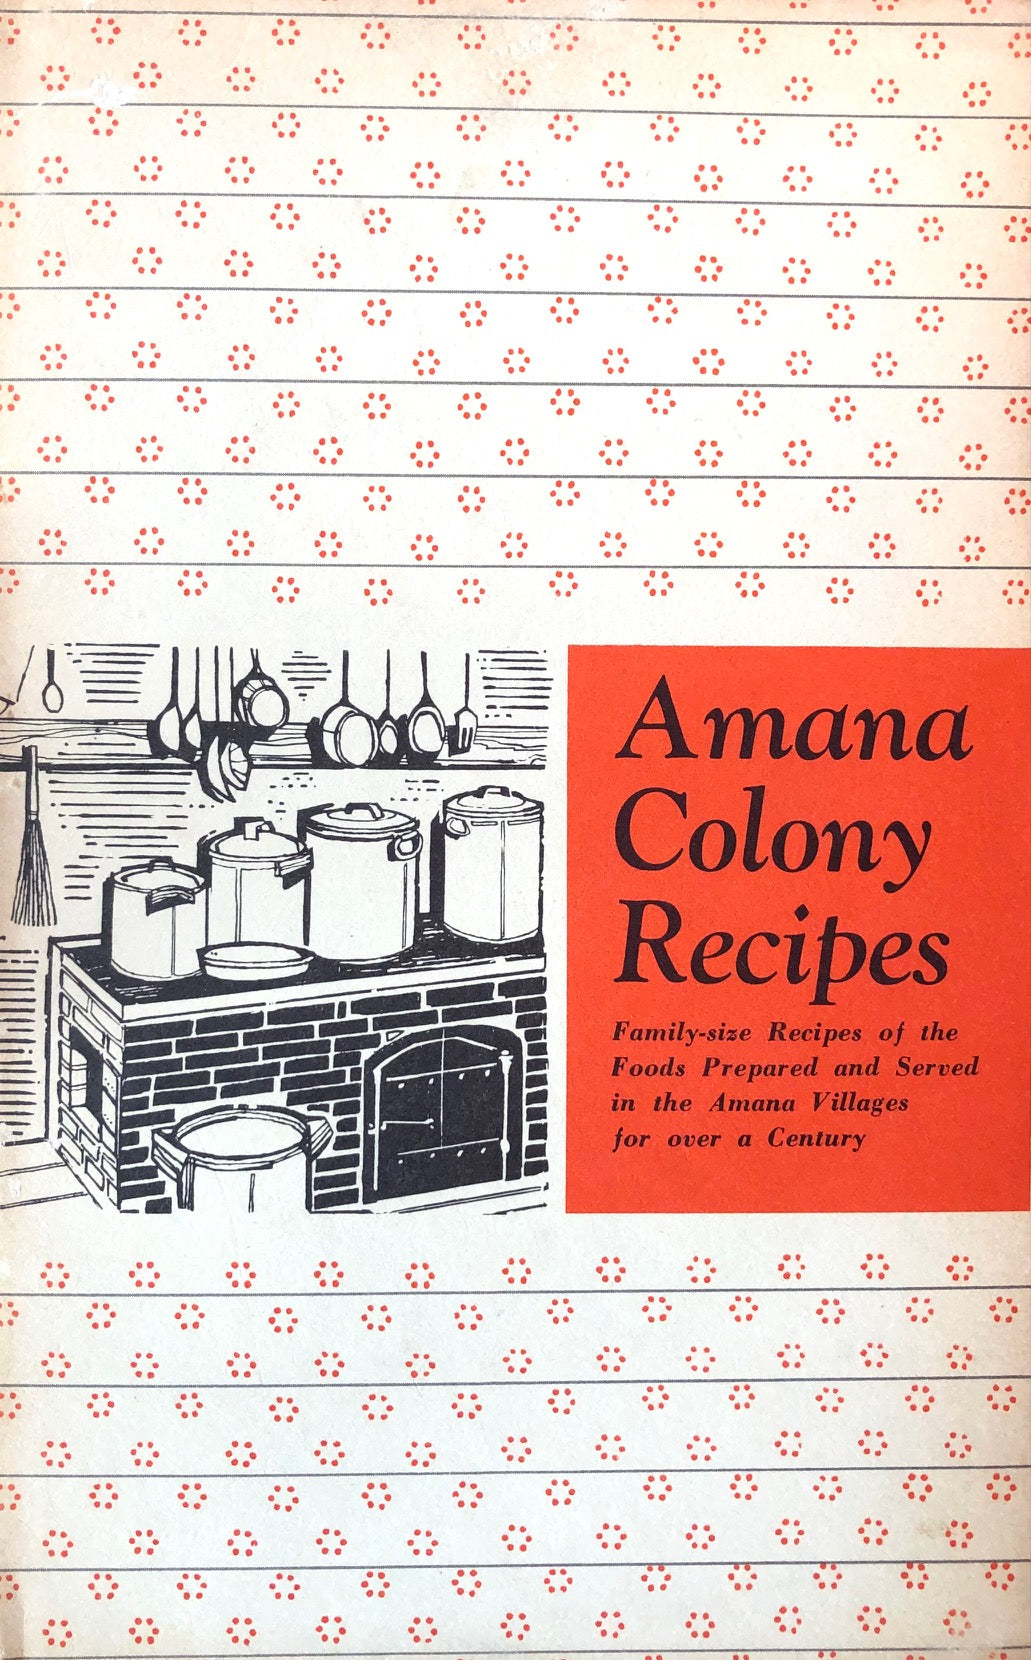 (Iowan) Ladies Auxiliary of the Homestead Welfare Club. A Collection of Traditional Amana Colony Recipes.